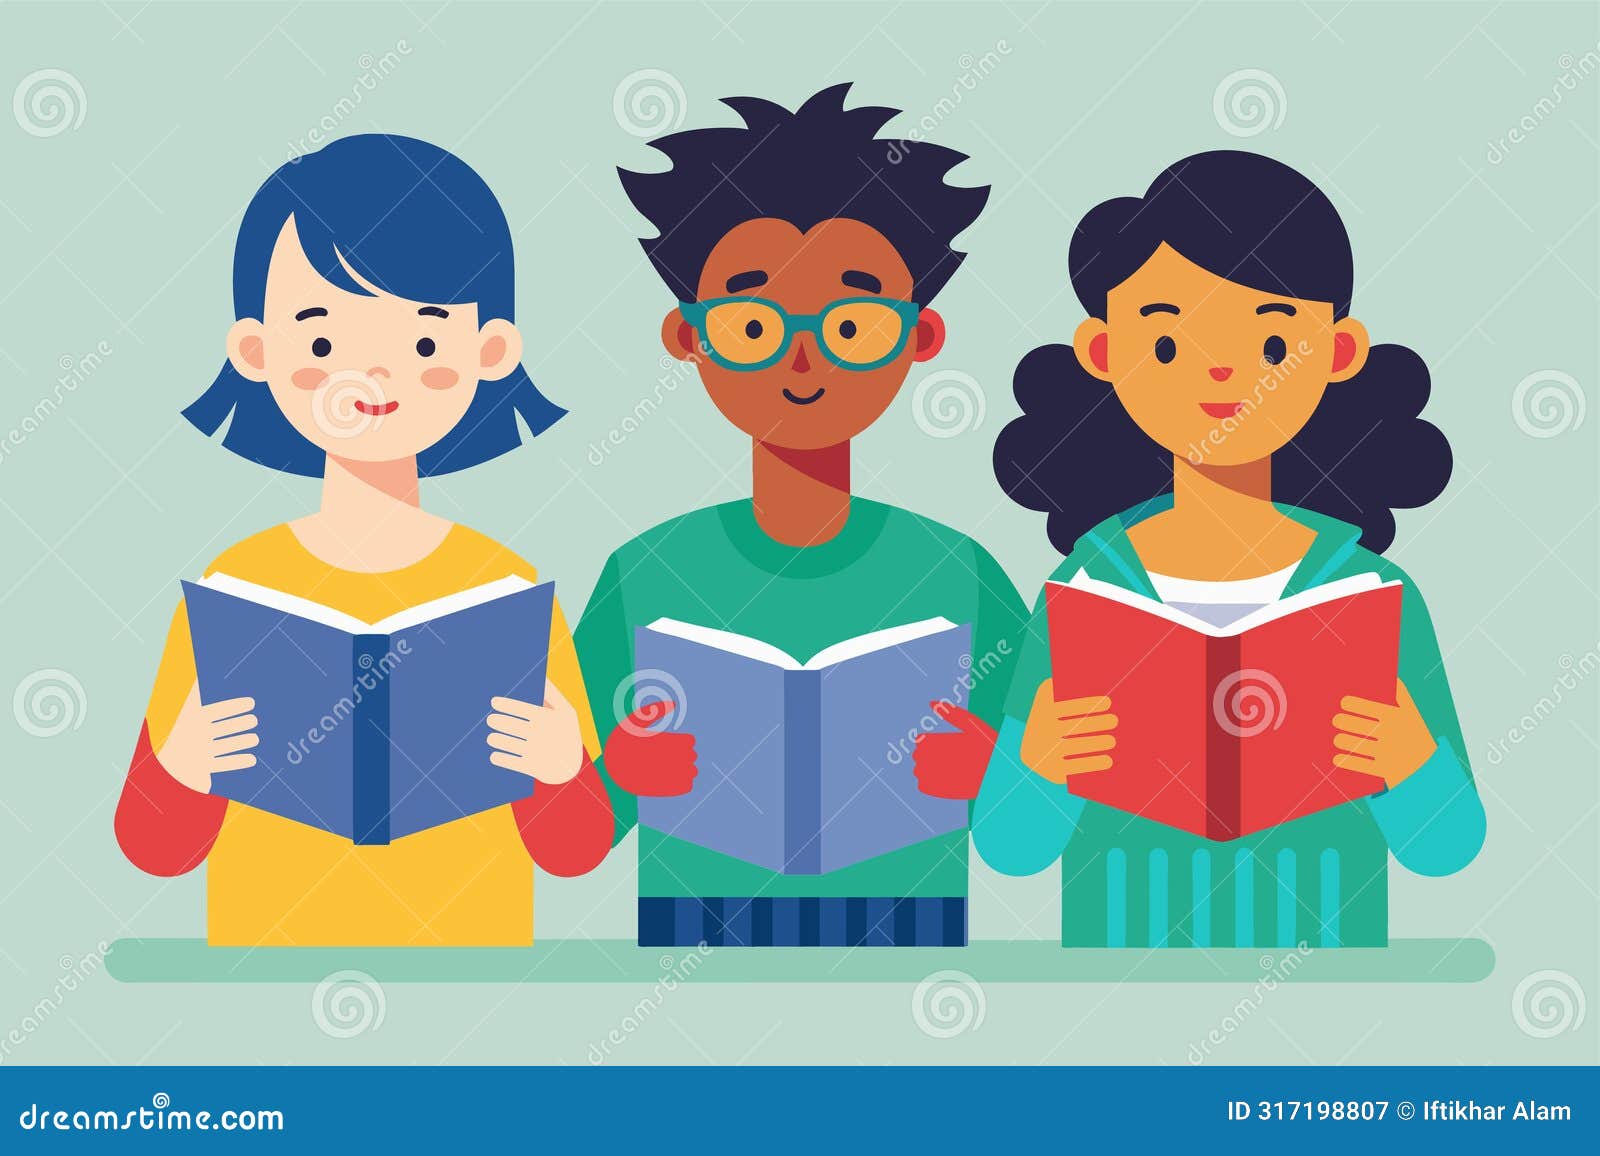 a group of individuals standing together, engrossed in reading books, three students are studying manuals, simple and minimalist